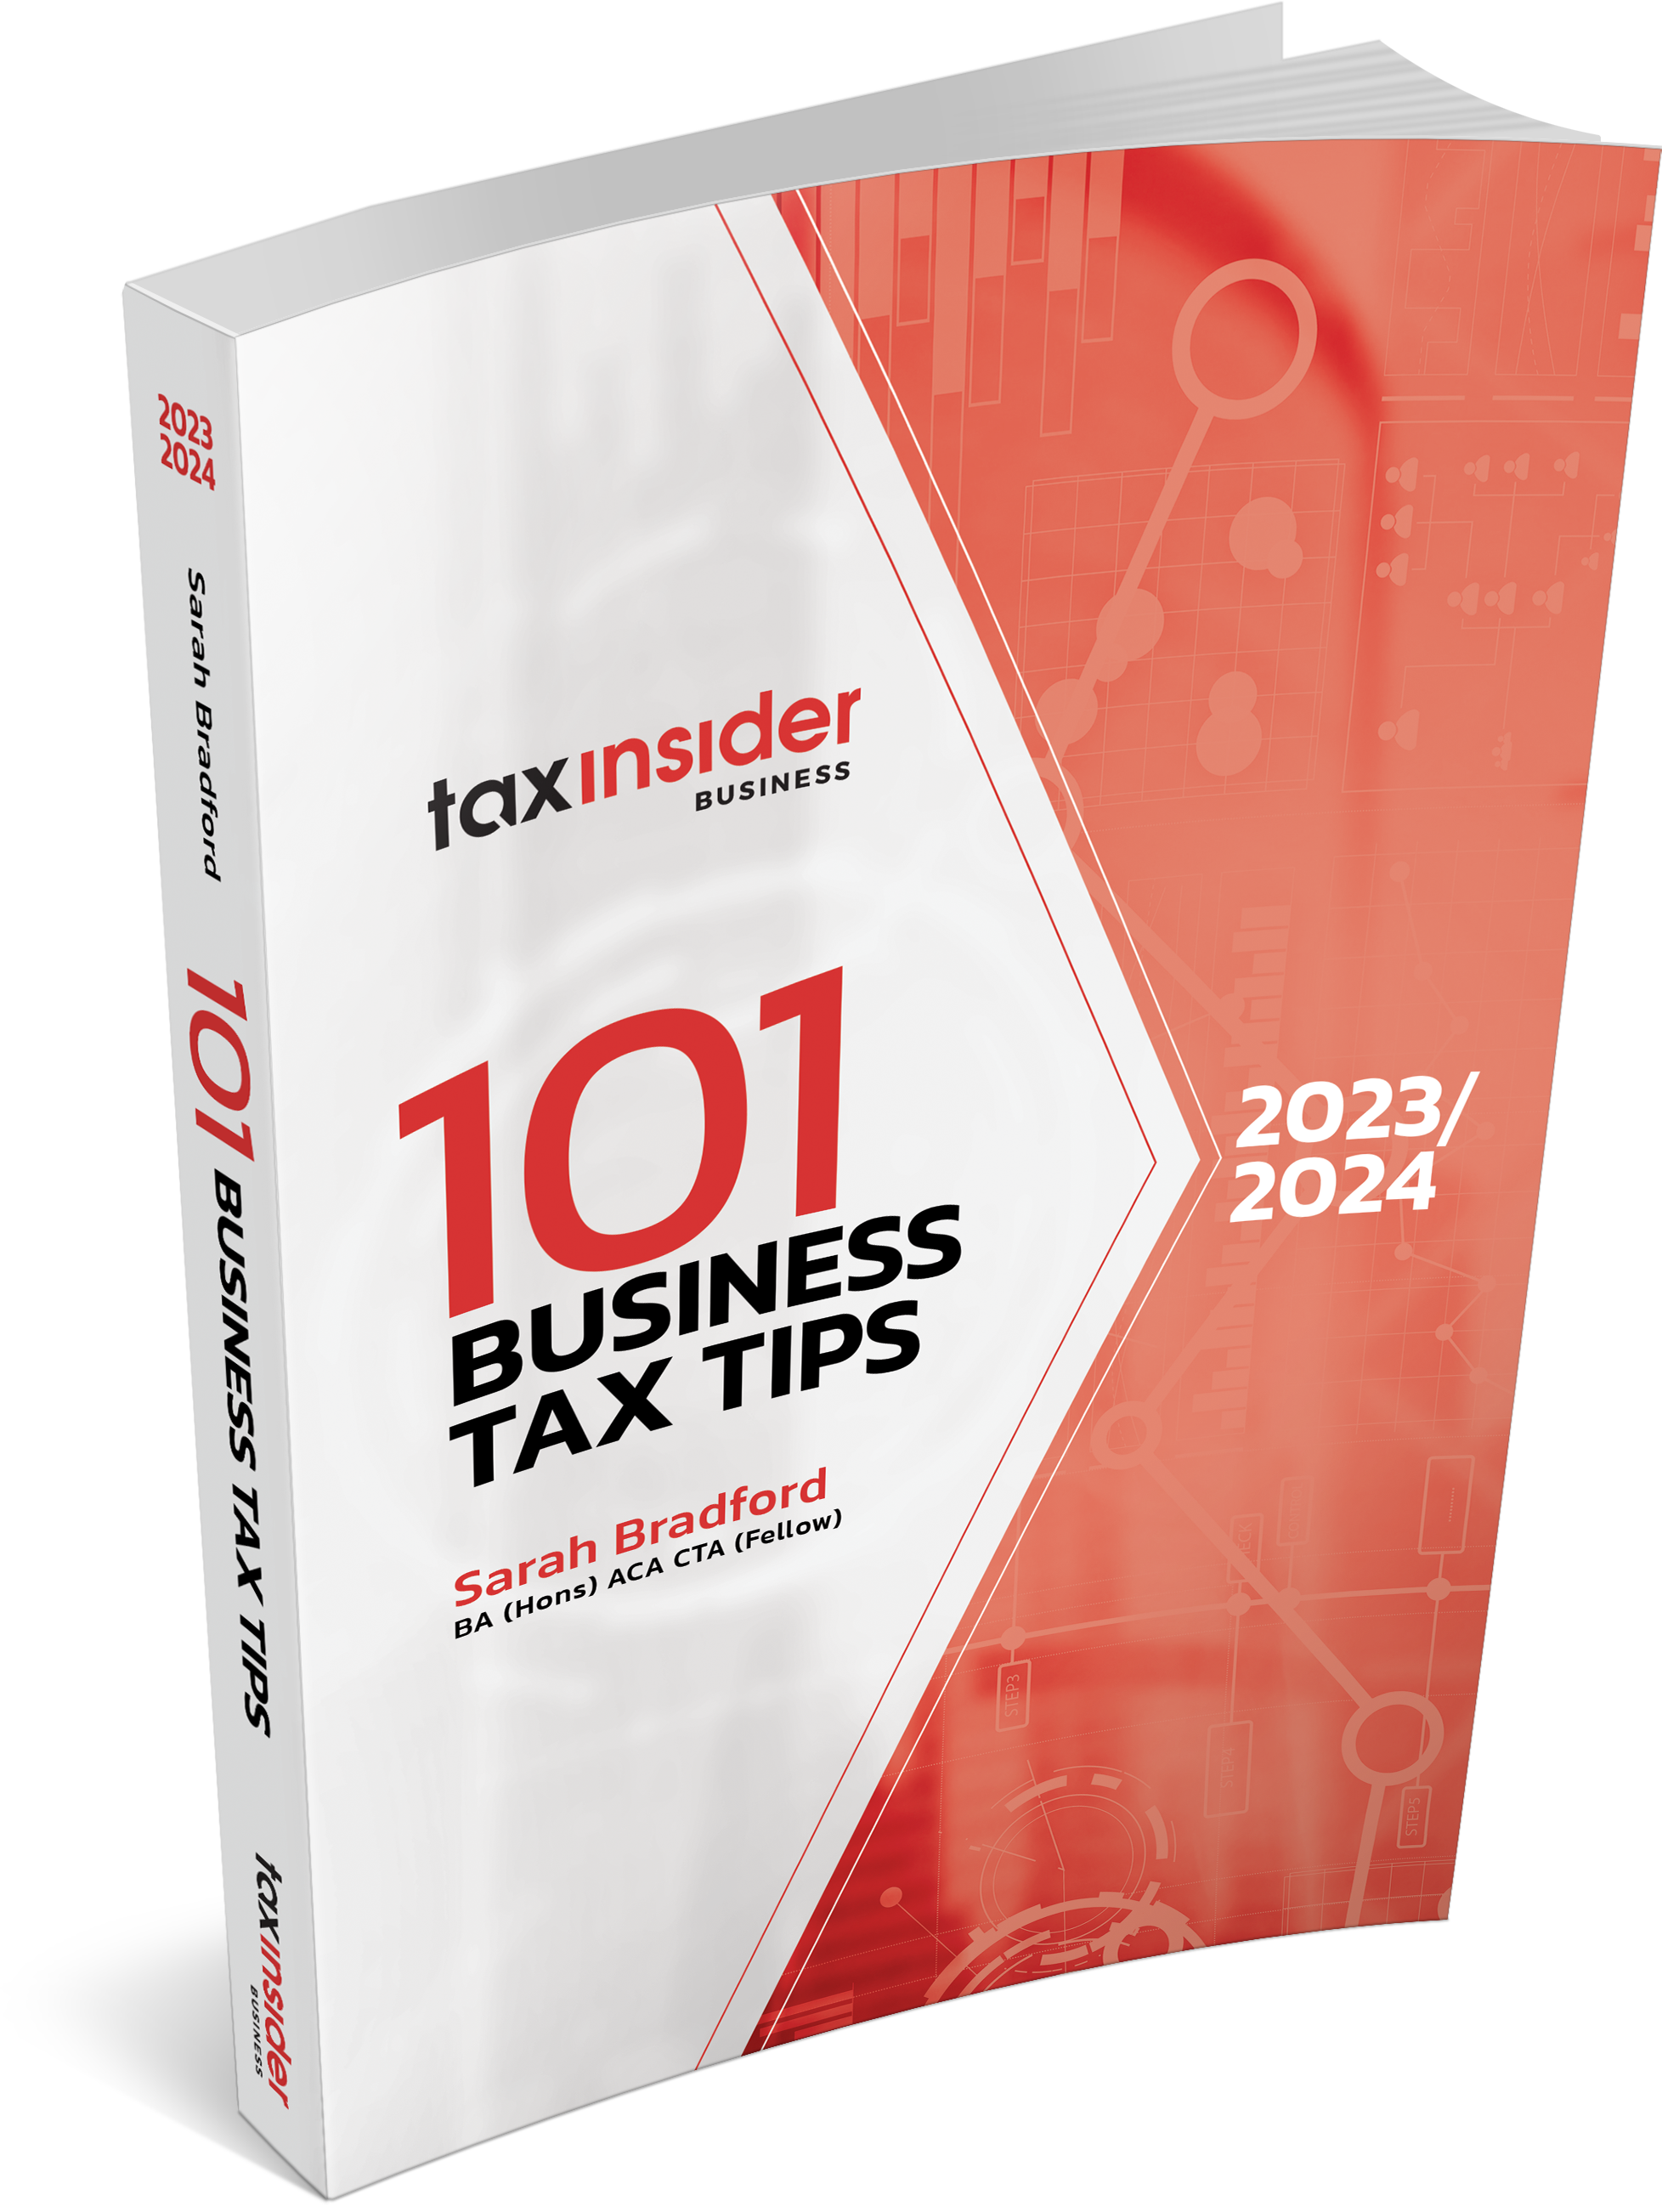 101 business tax tips book cover business